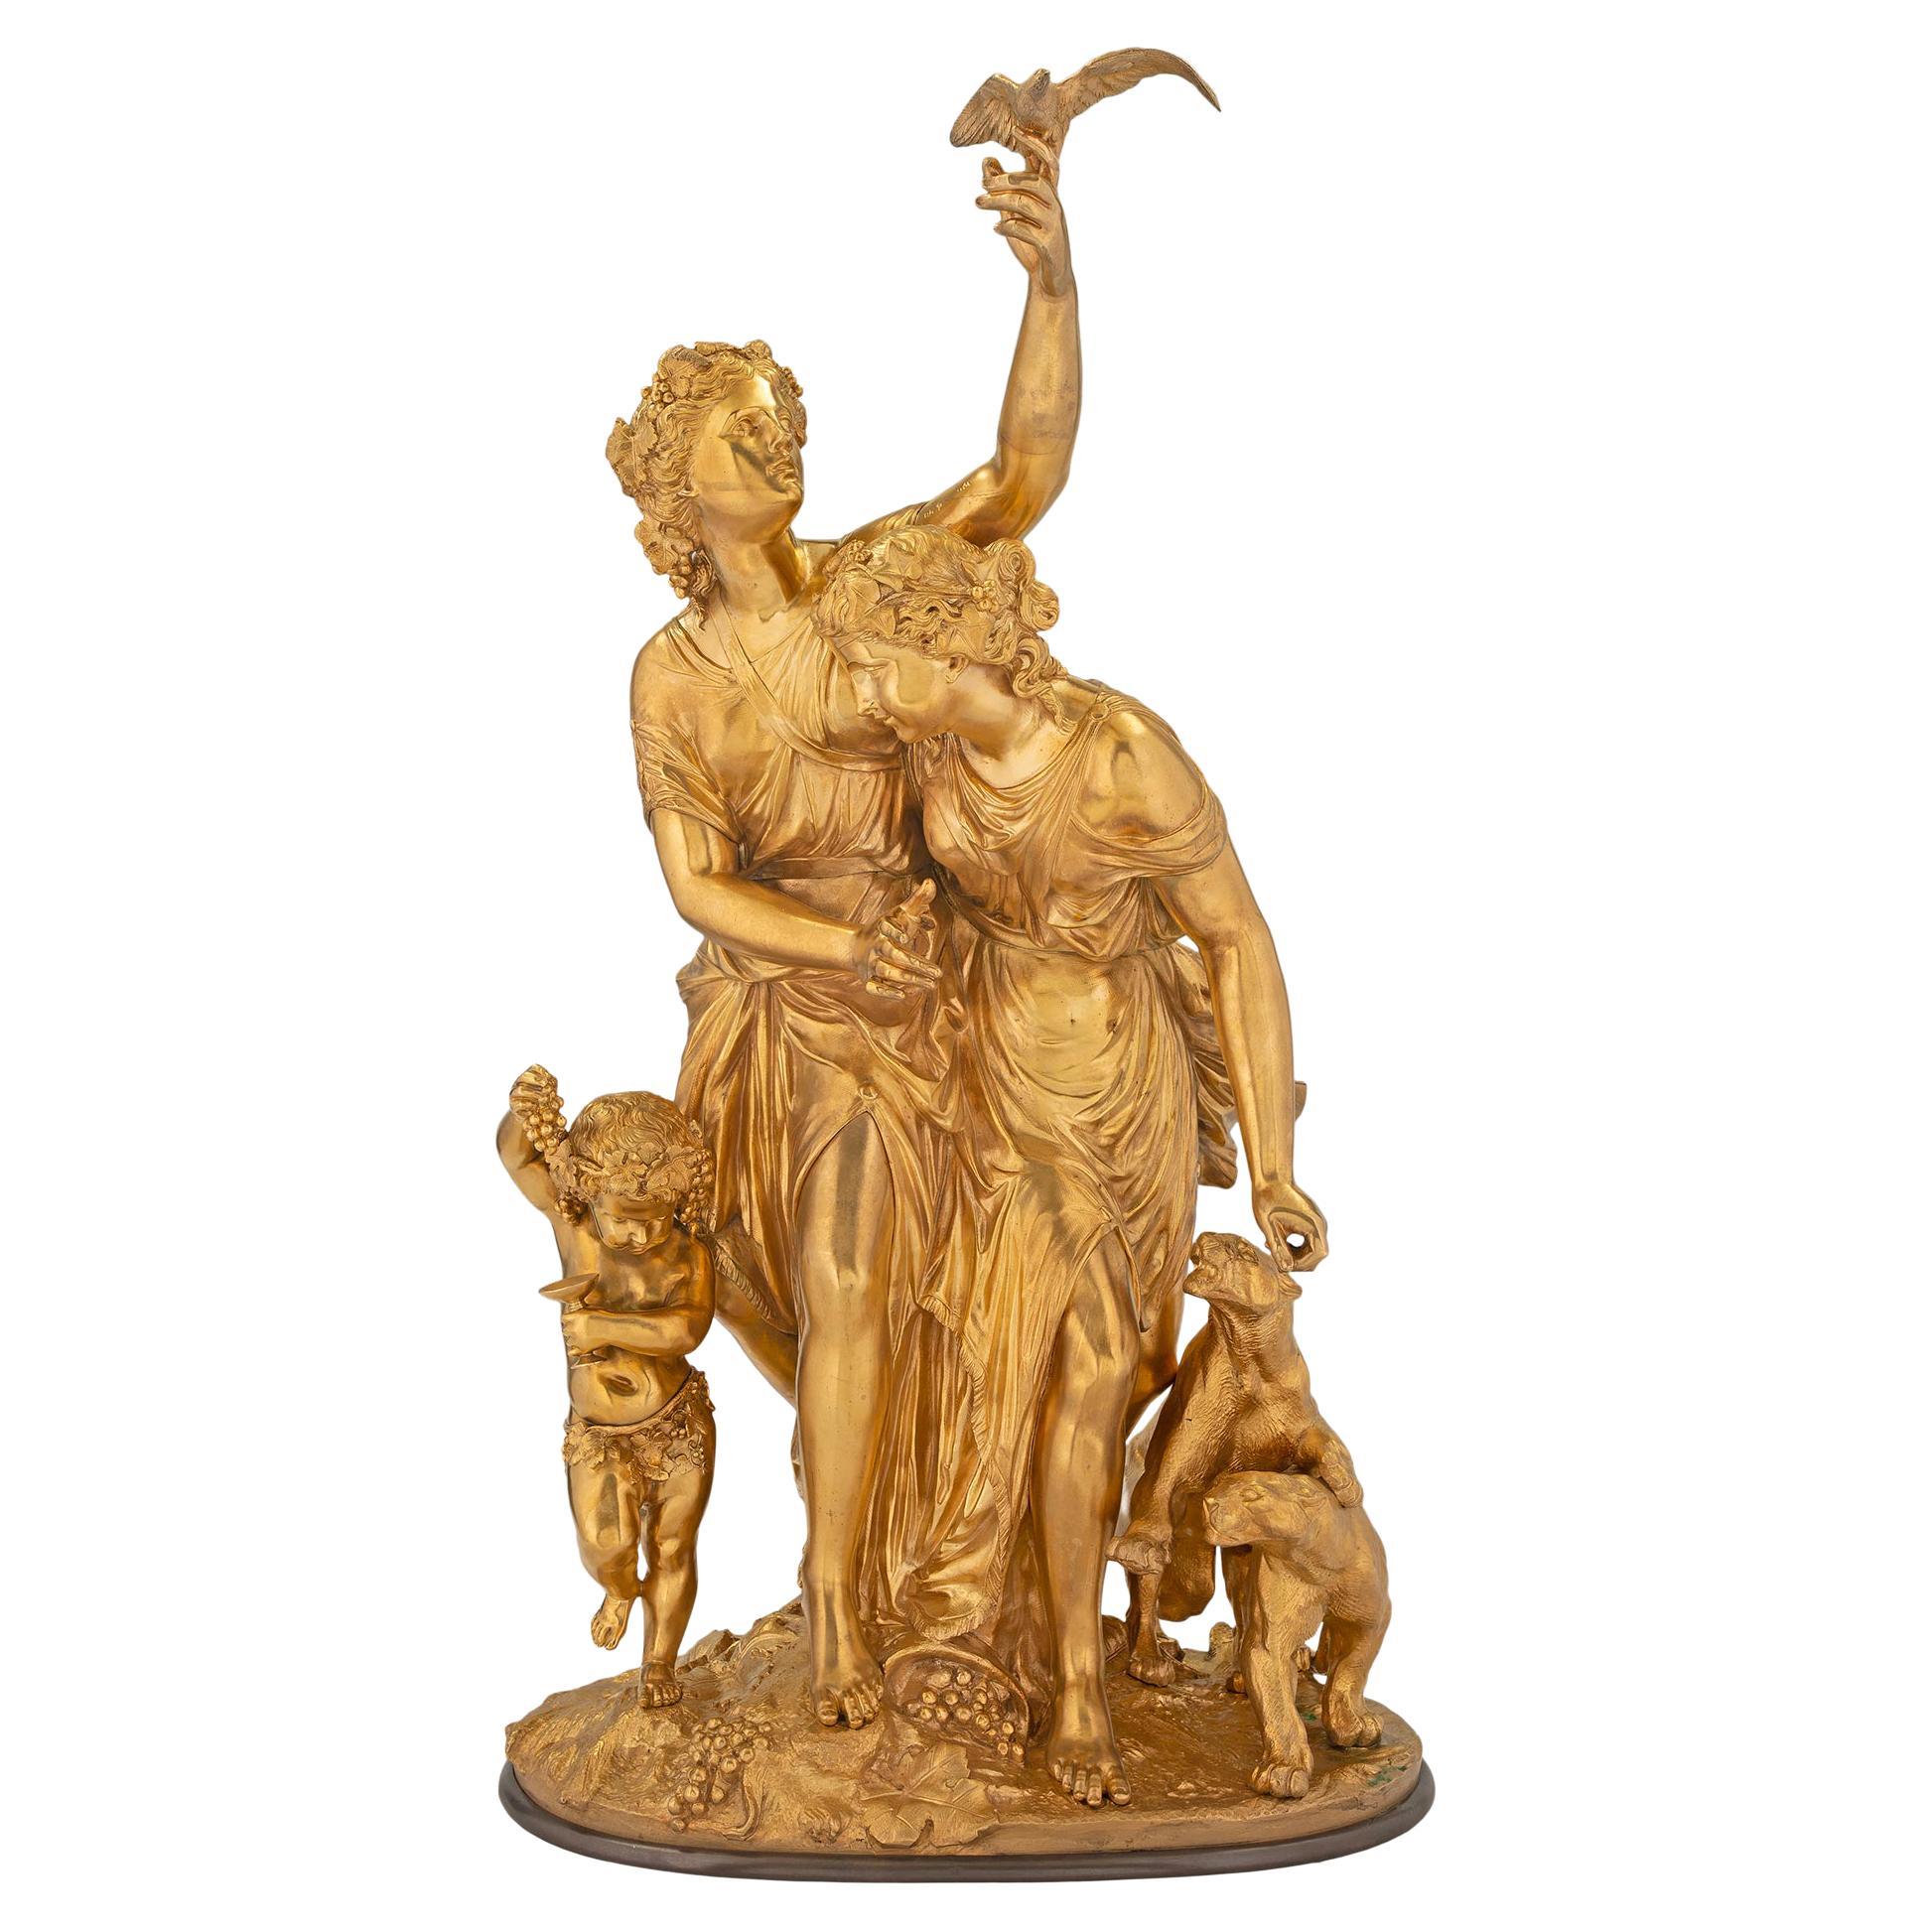 French Mid-19th Century Louis XVI Style Ormolu & Bronze Statue, Signed Delesalle For Sale